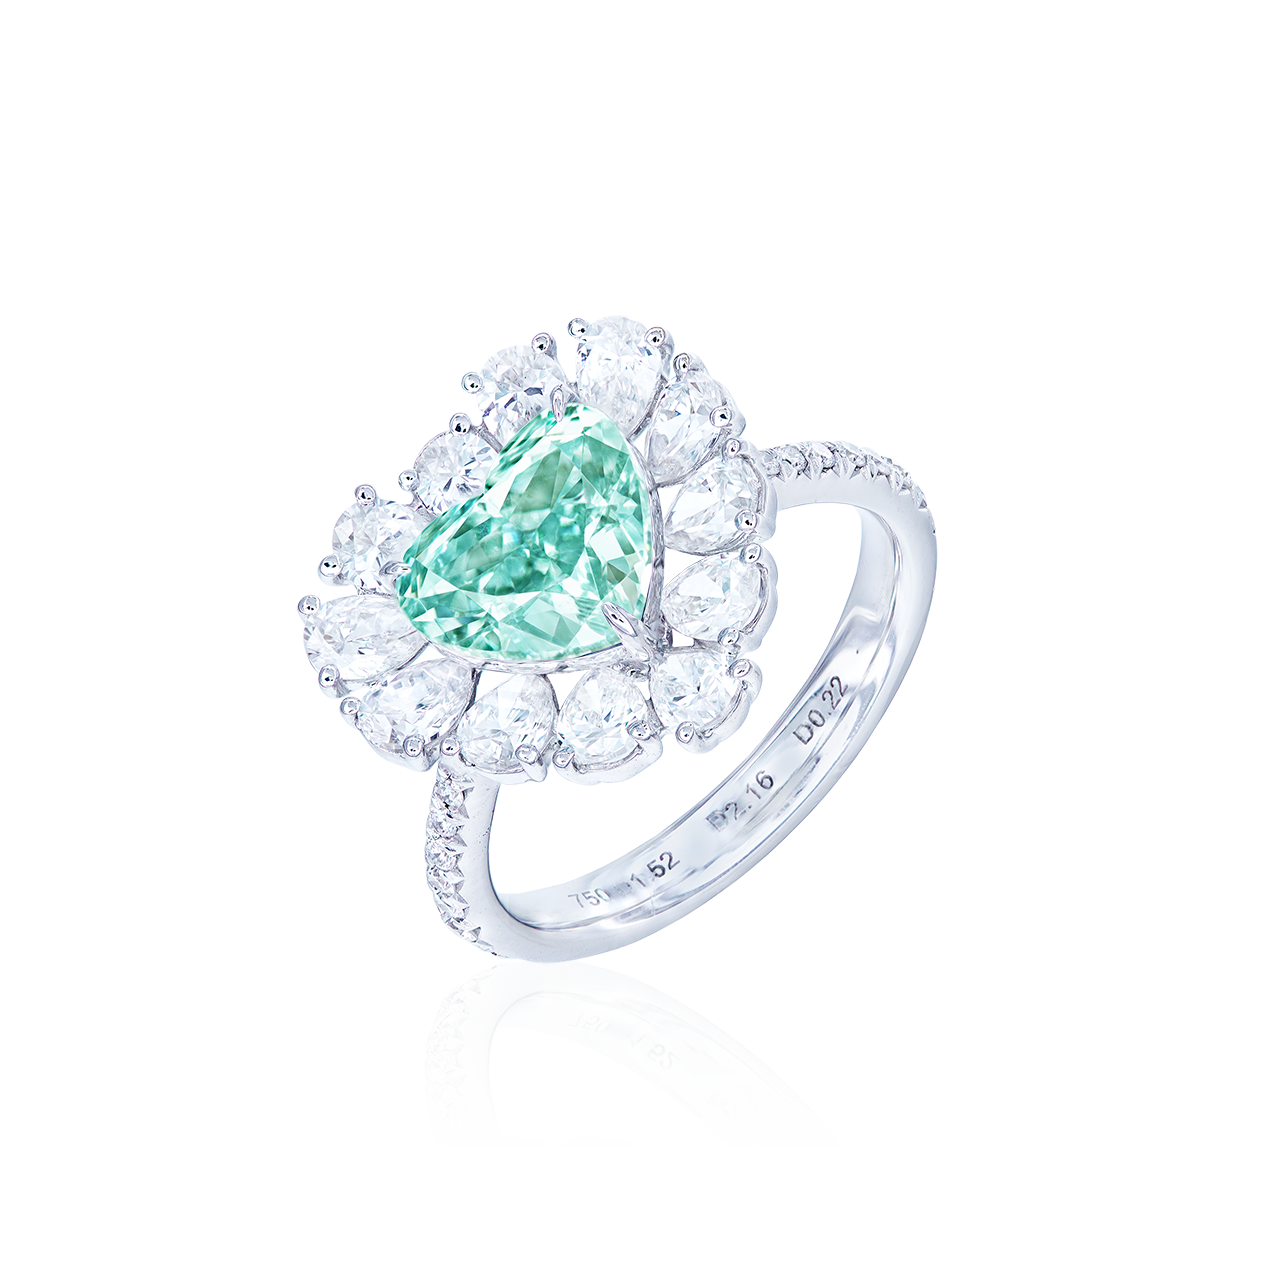 GIA 2.16克拉 濃彩藍綠鑽鑽戒
Fancy Intense Blue-Green 
Colored Diamond Ring